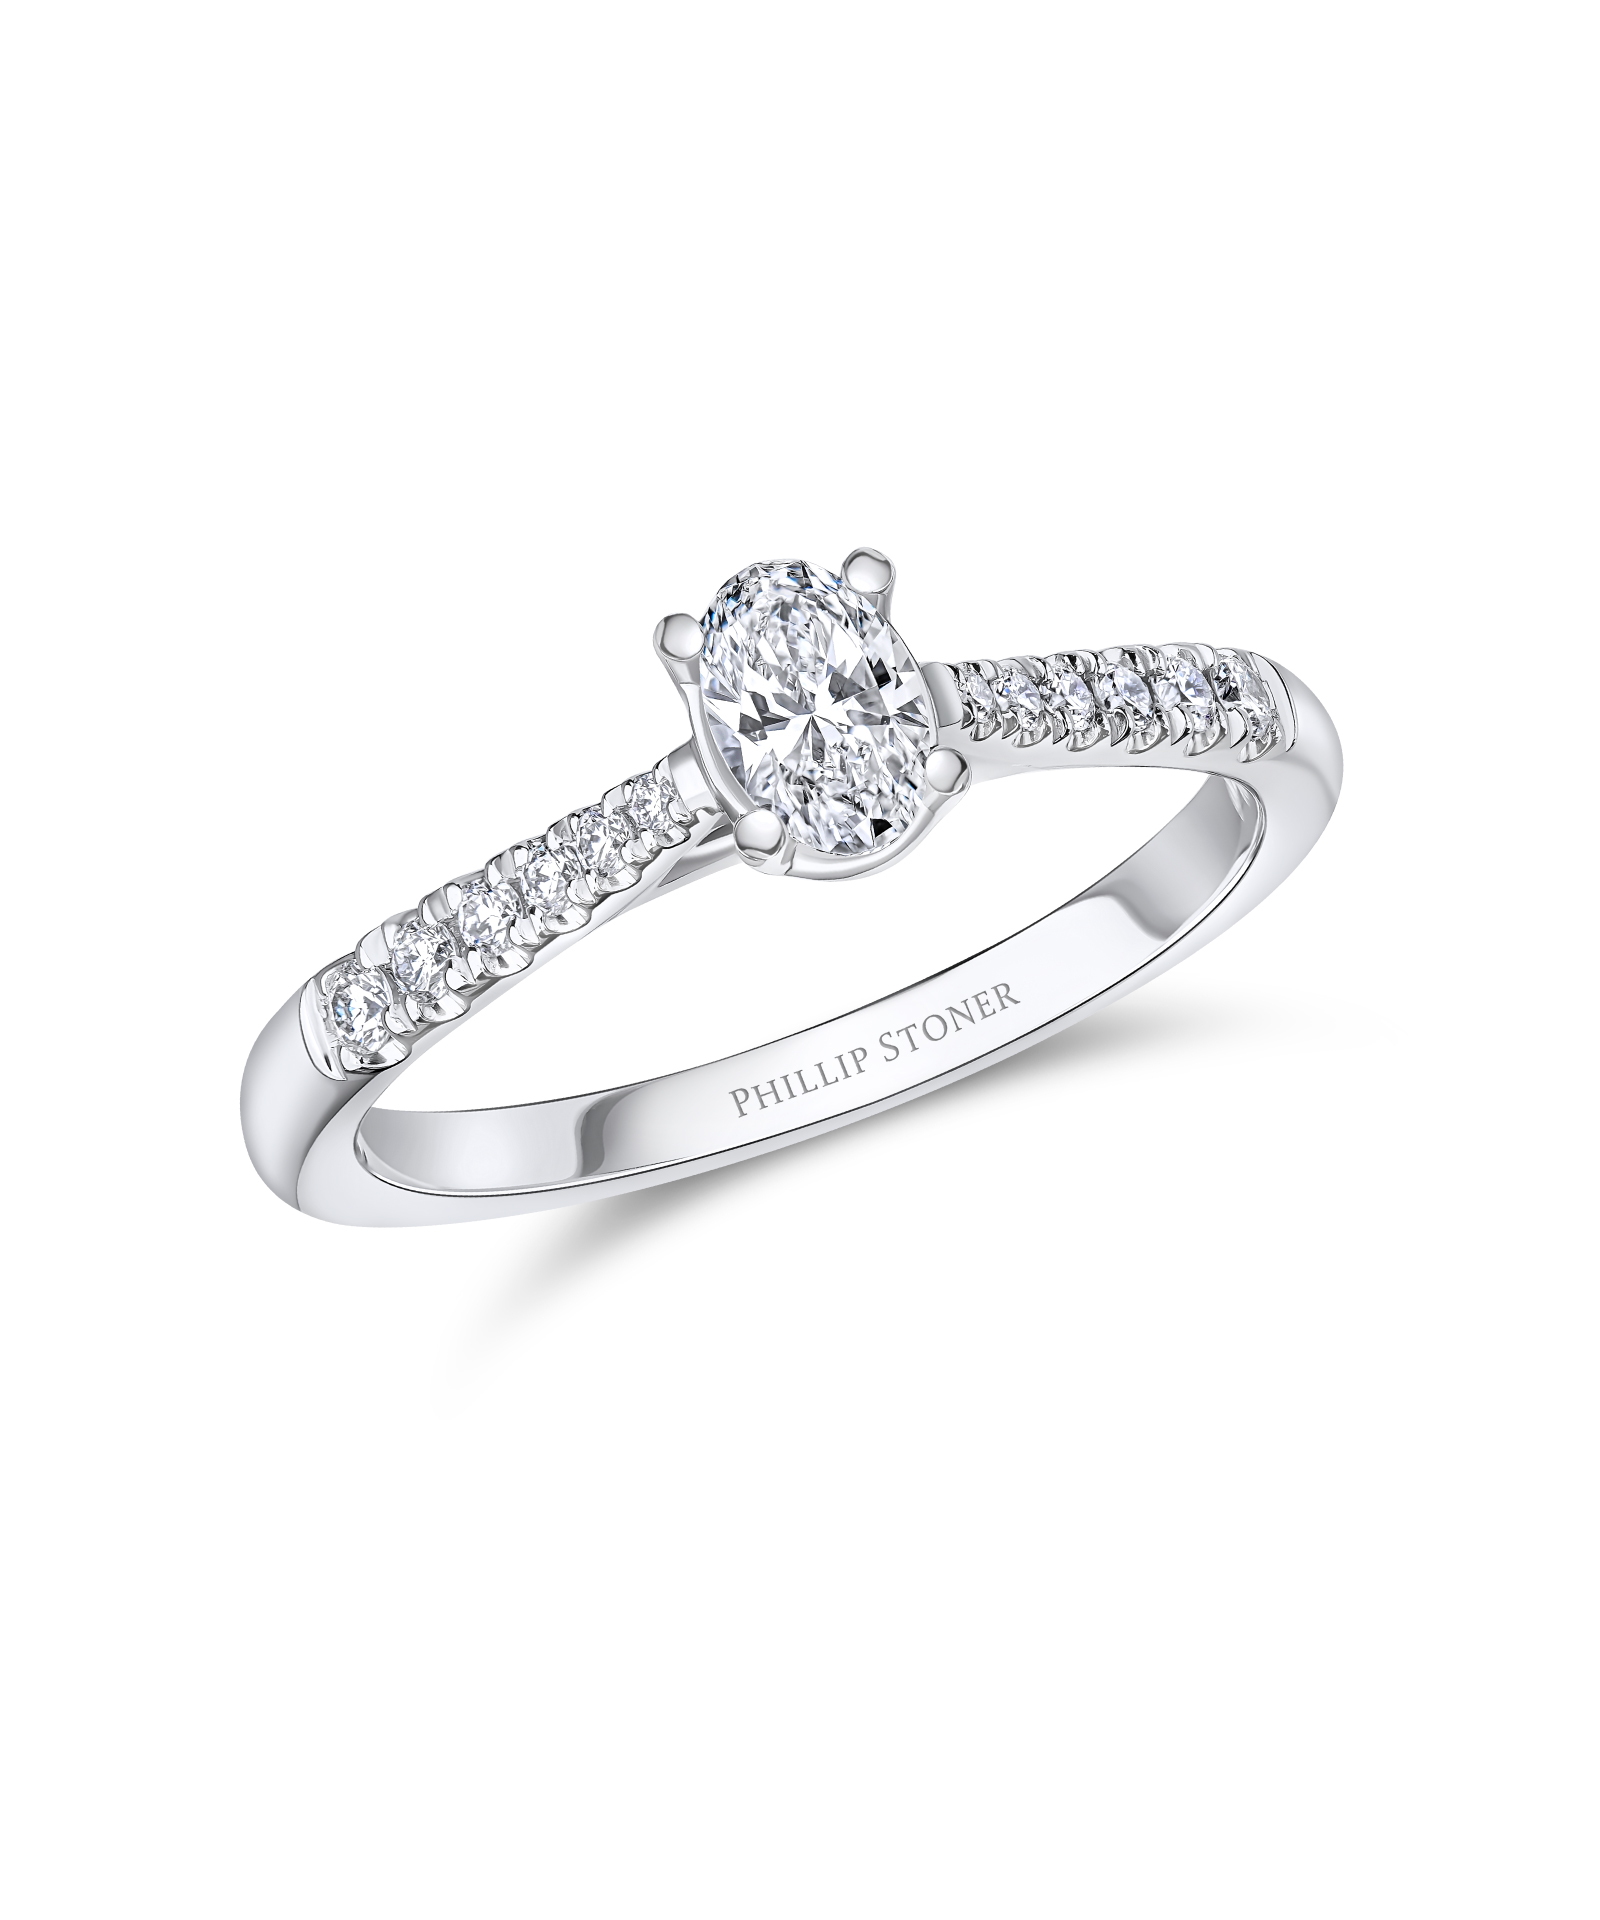 0.30ct Oval Cut Diamond Engagement Ring with Scallop Set Shoulders - Phillip Stoner The Jeweller